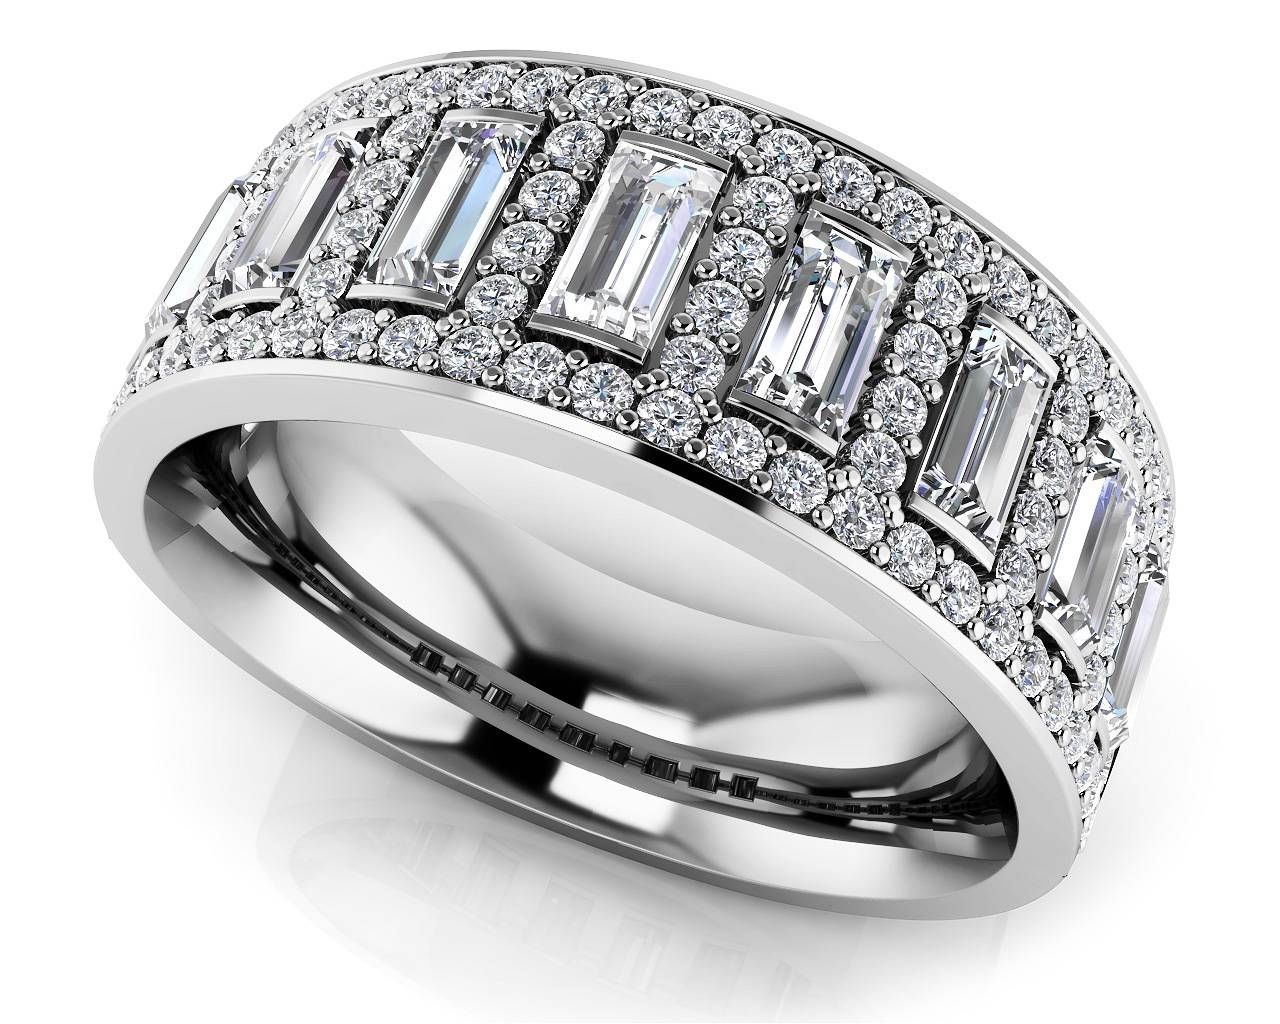 Design Your Own Diamond Anniversary Ring & Eternity Ring With Regard To Current Modern Anniversary Rings (View 9 of 25)